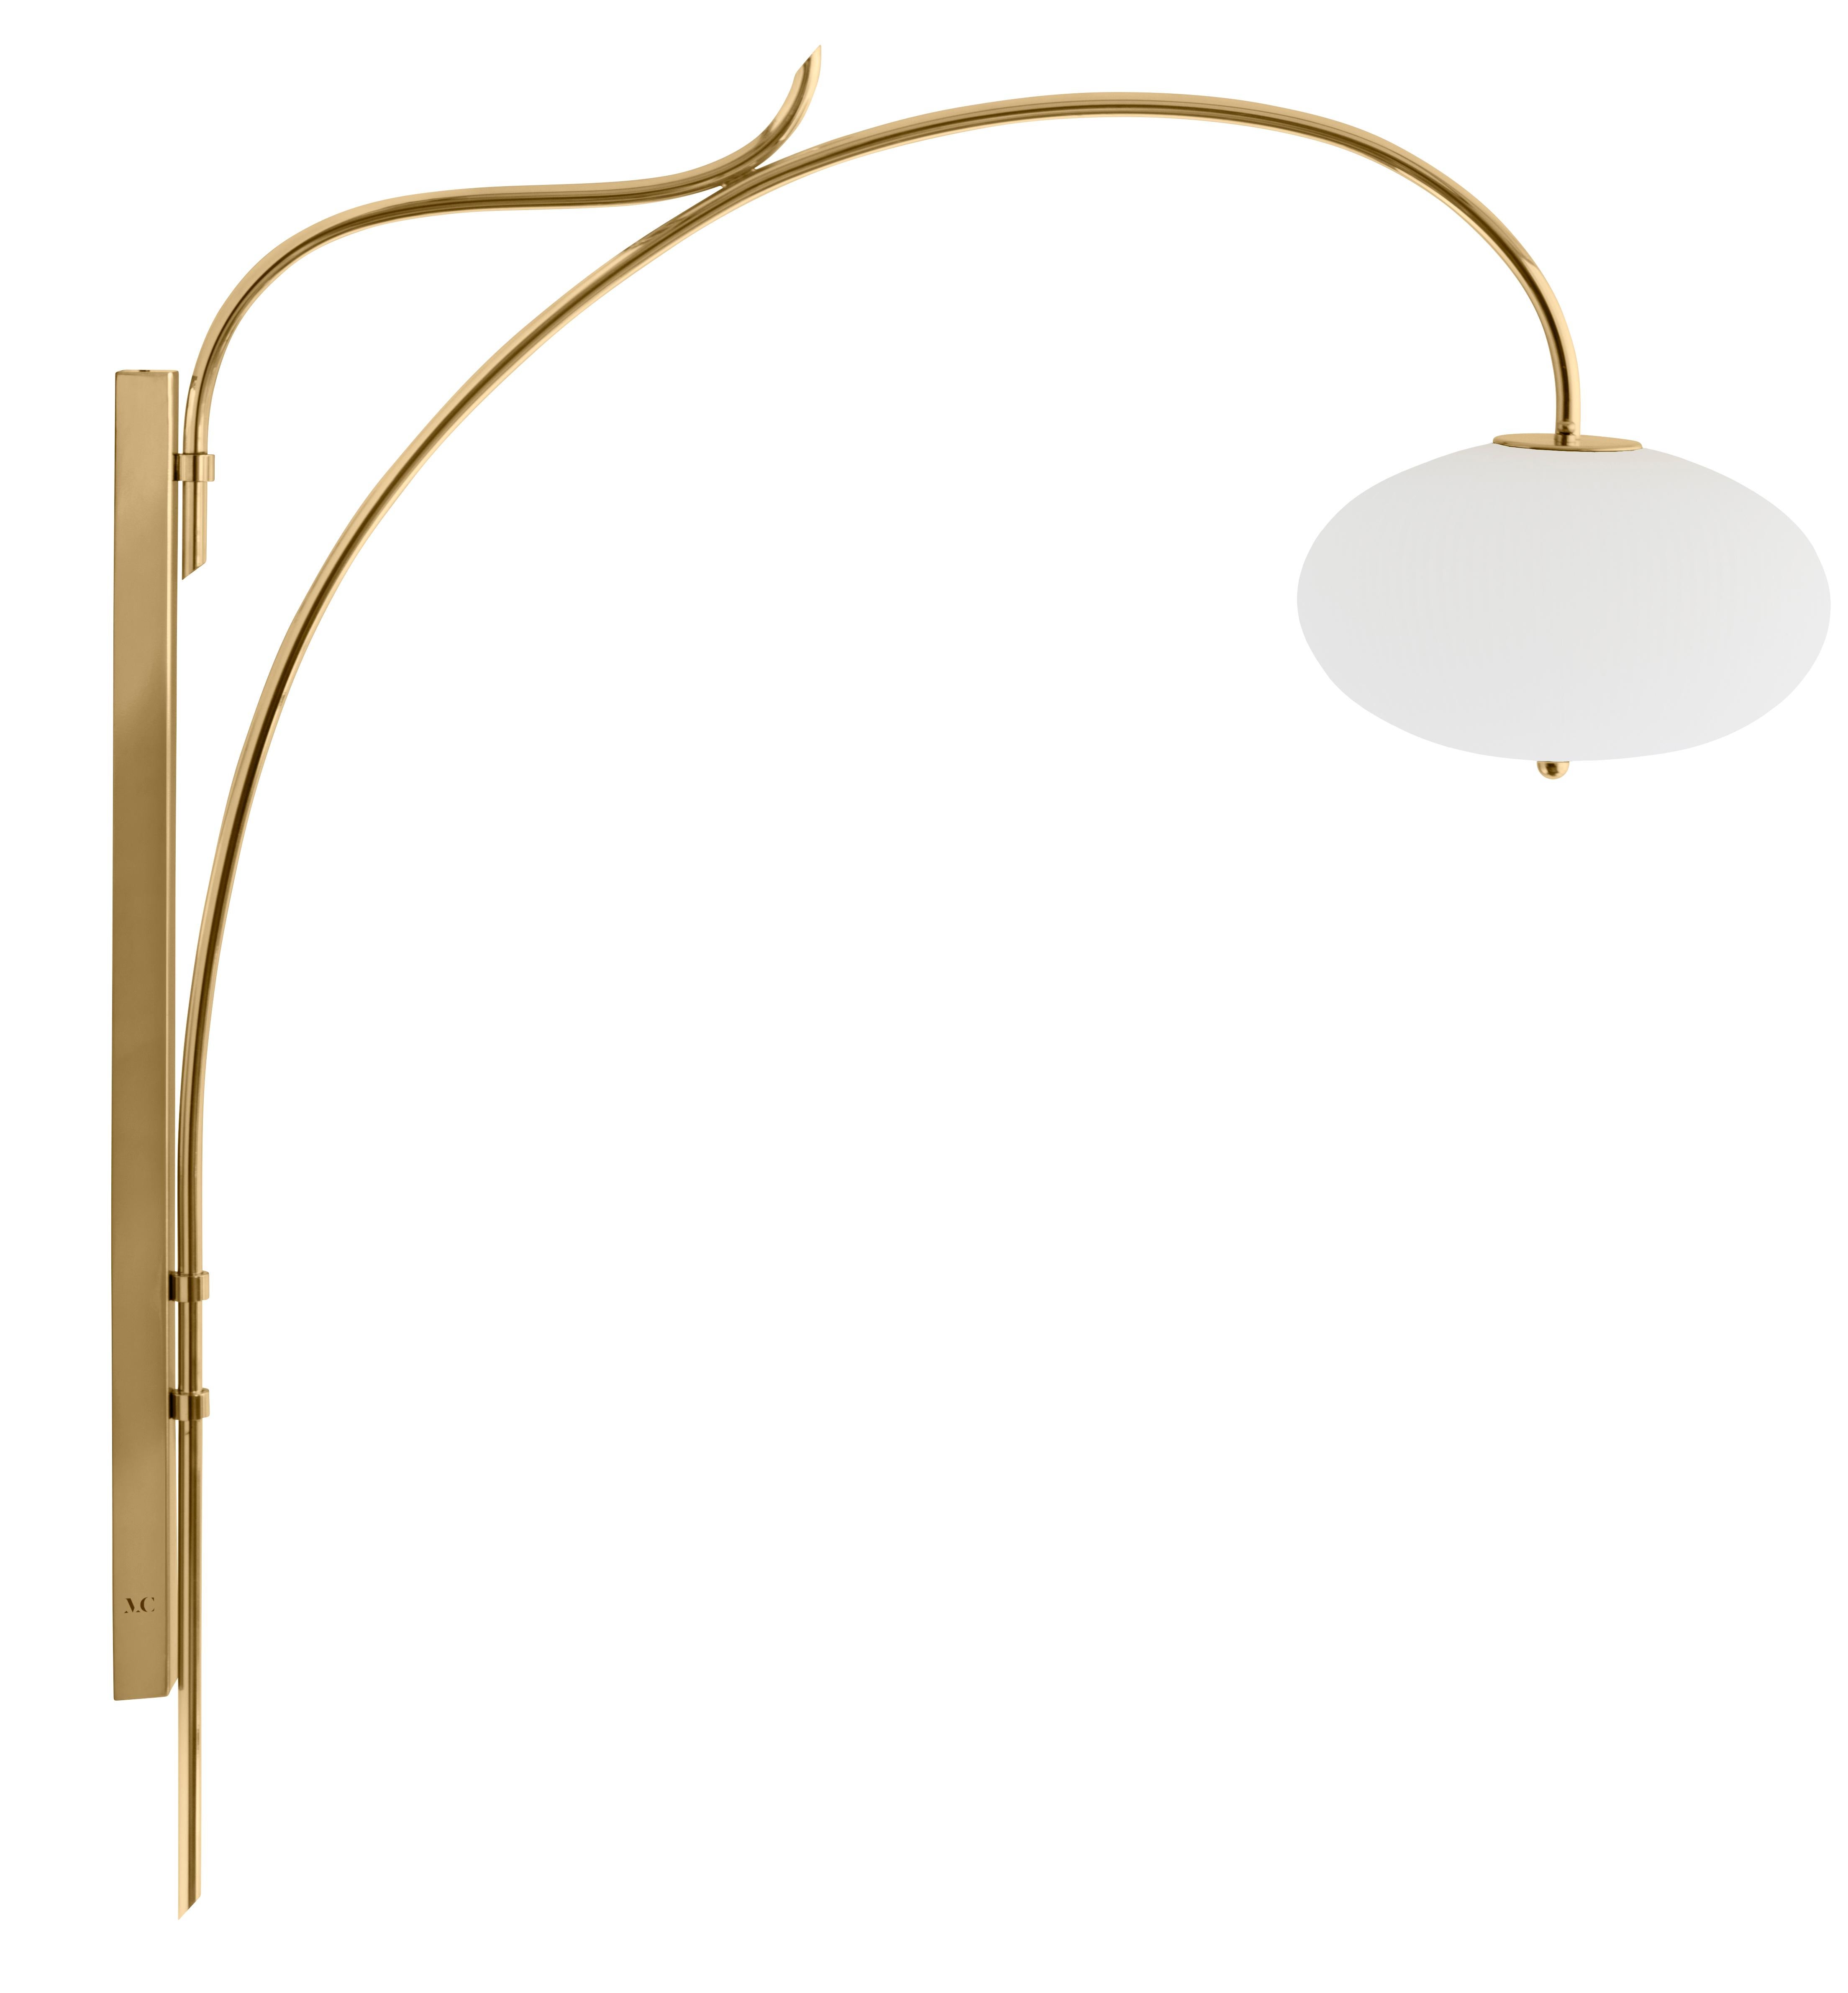 Wall lamp China 07 by Magic Circus Editions
Dimensions: H 120 x W 32 x D 113.5 cm
Materials: Brass, mouth blown glass sculpted with a diamond saw
Colour: enamel soft white

Available finishes: Brass, nickel
Available colours: enamel soft